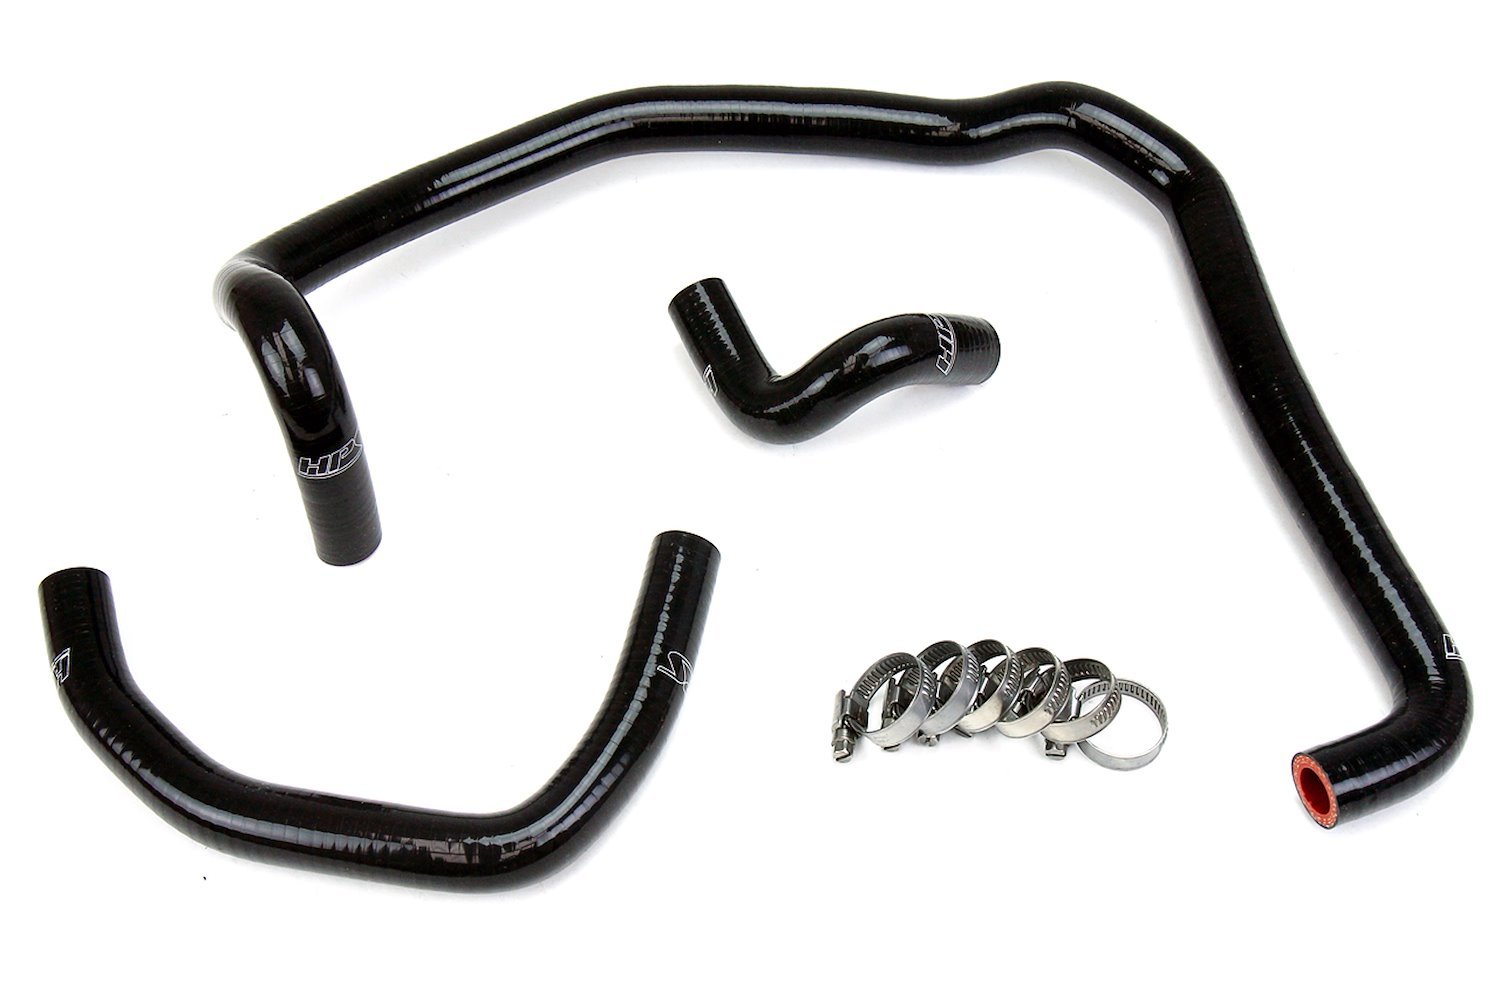 57-1746H-BLK Heater Hose Kit, High-Temp 3-Ply Reinforced Silicone, Replace OEM Rubber Heater Coolant Hoses